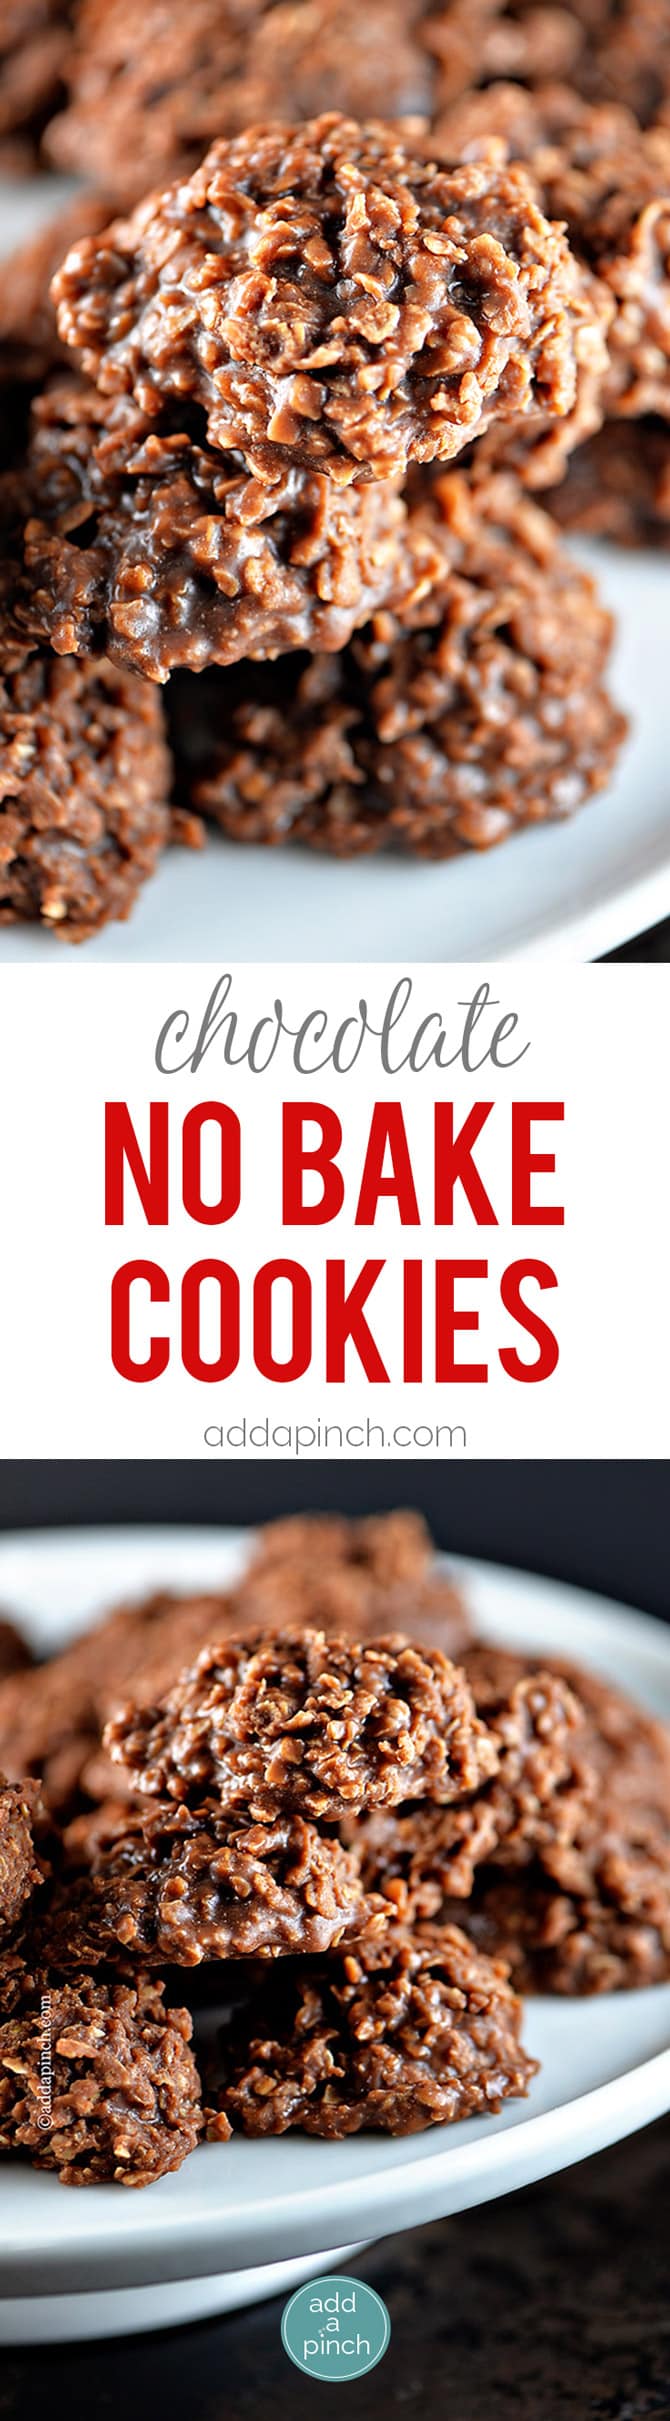 No Bake Cookies Recipe - These simple chocolate no bake cookies make a perfect sweet treat. Made with cocoa powder, peanut butter, and oats, these no bake cookies are always a favorite. // addapinch.com